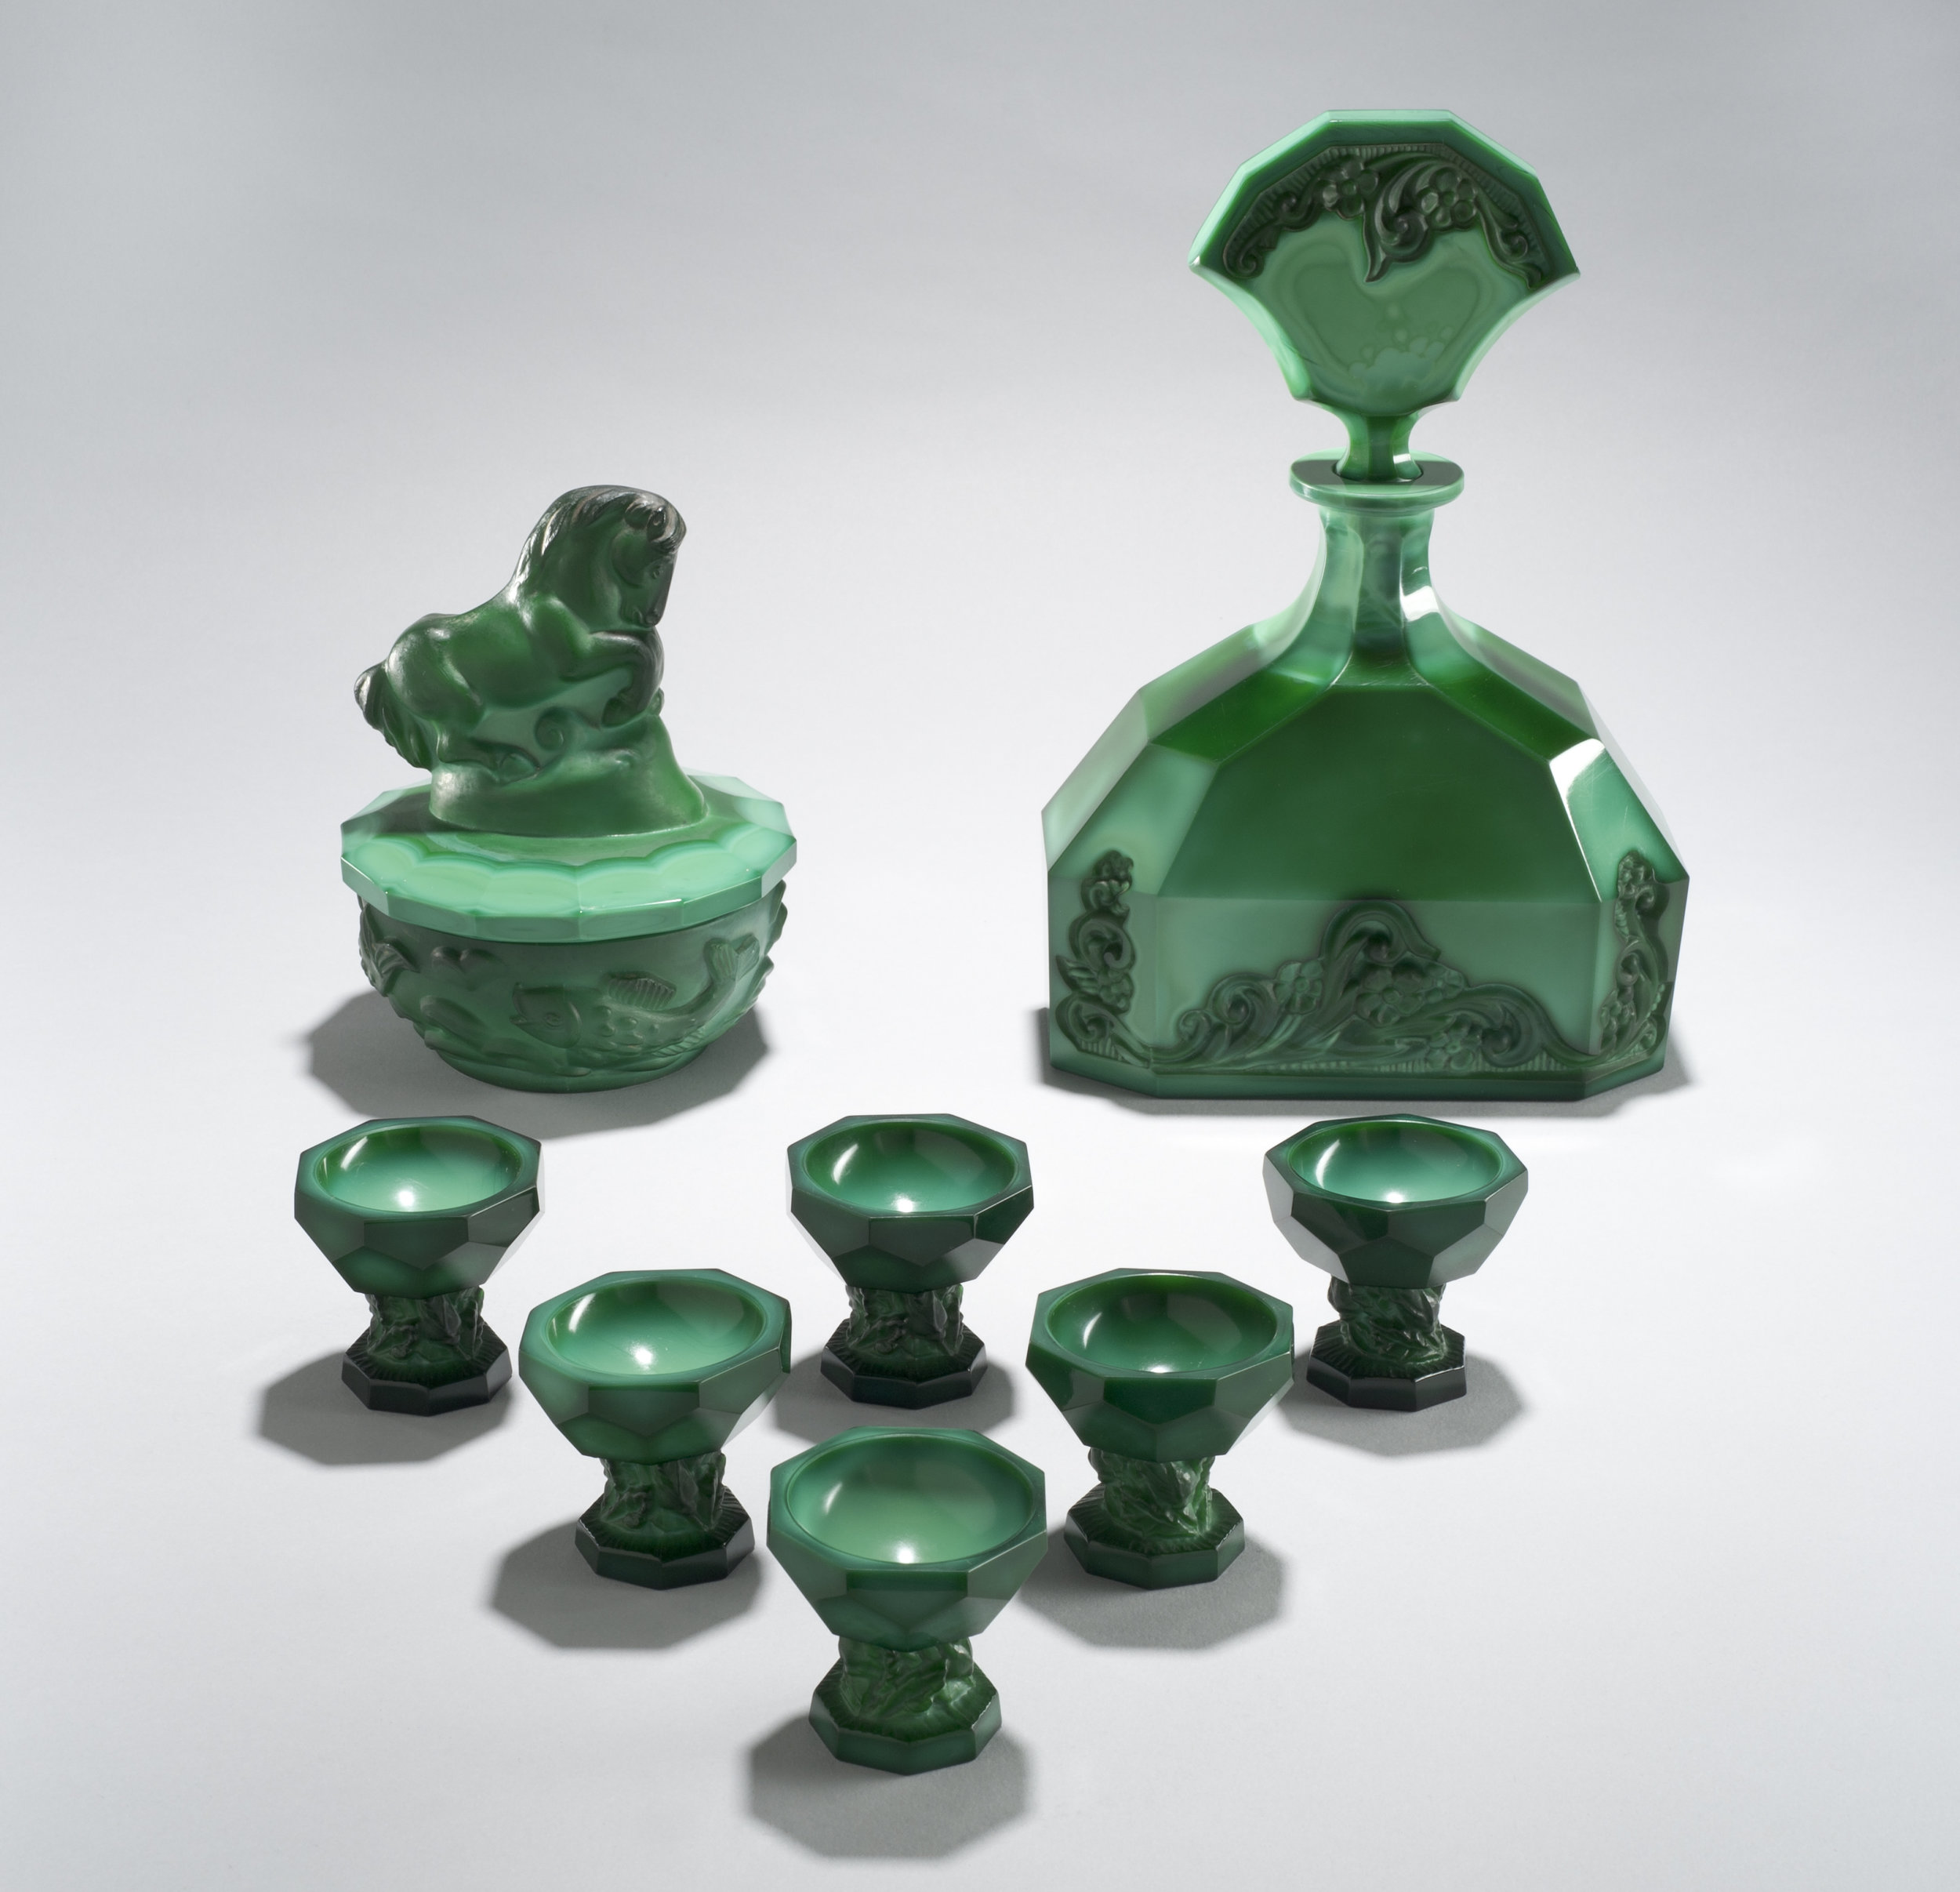  Possibly František Halama (Czech, 1913-1976).&nbsp; Horse Handle Powder box  and  Lisquor Set,  circa 1939.&nbsp;Malachite glass, pressed, matte-cut, and polished;&nbsp;11 1/4 x 7 1/2 x 4 in. Collection of Museum of Glass, Tacoma, Washington, from t